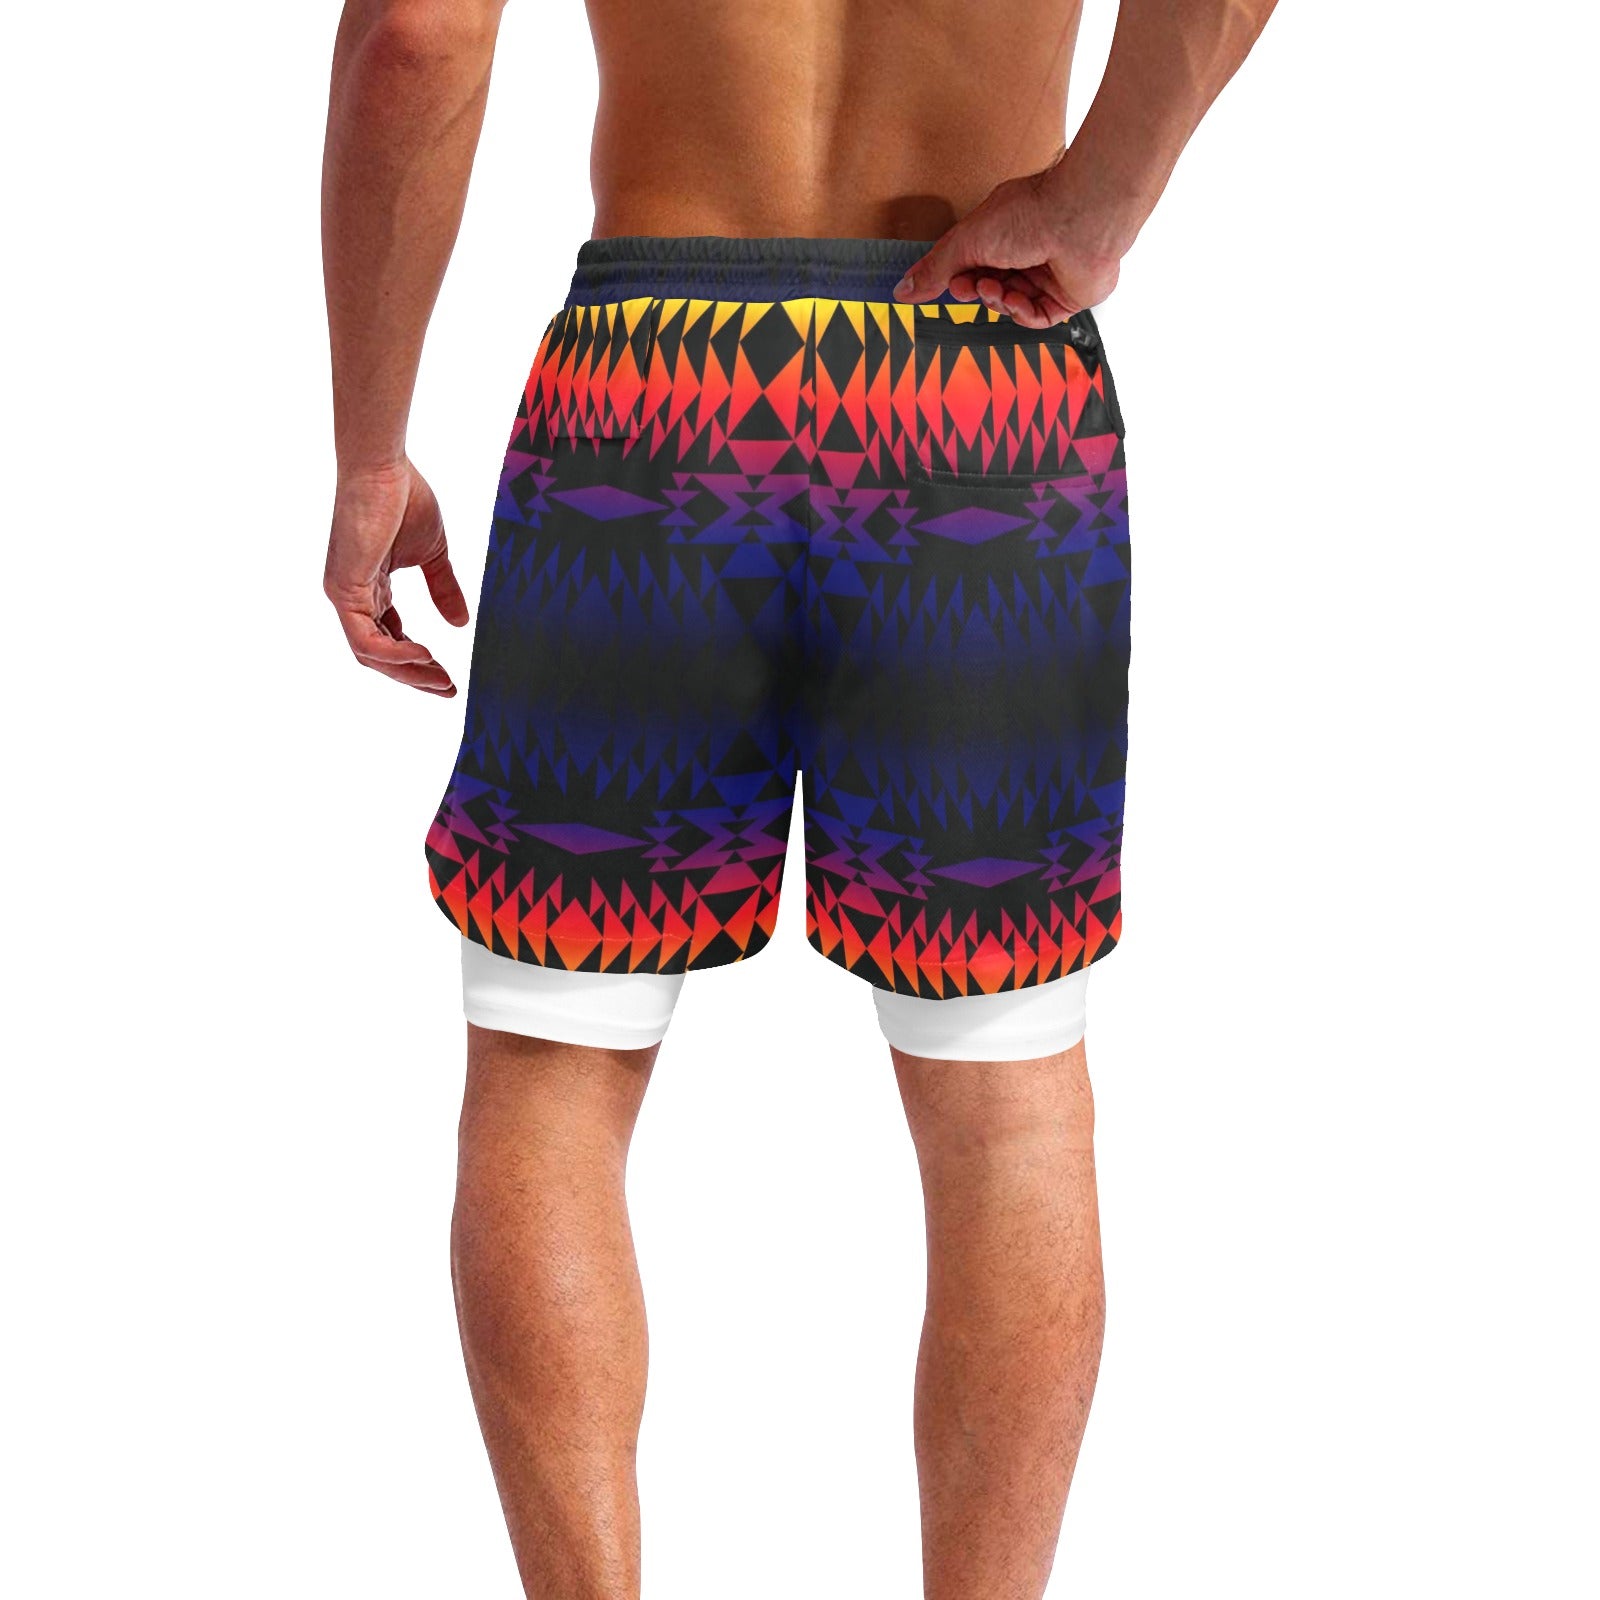 Two Worlds Apart Men's Sports Shorts with Compression Liner